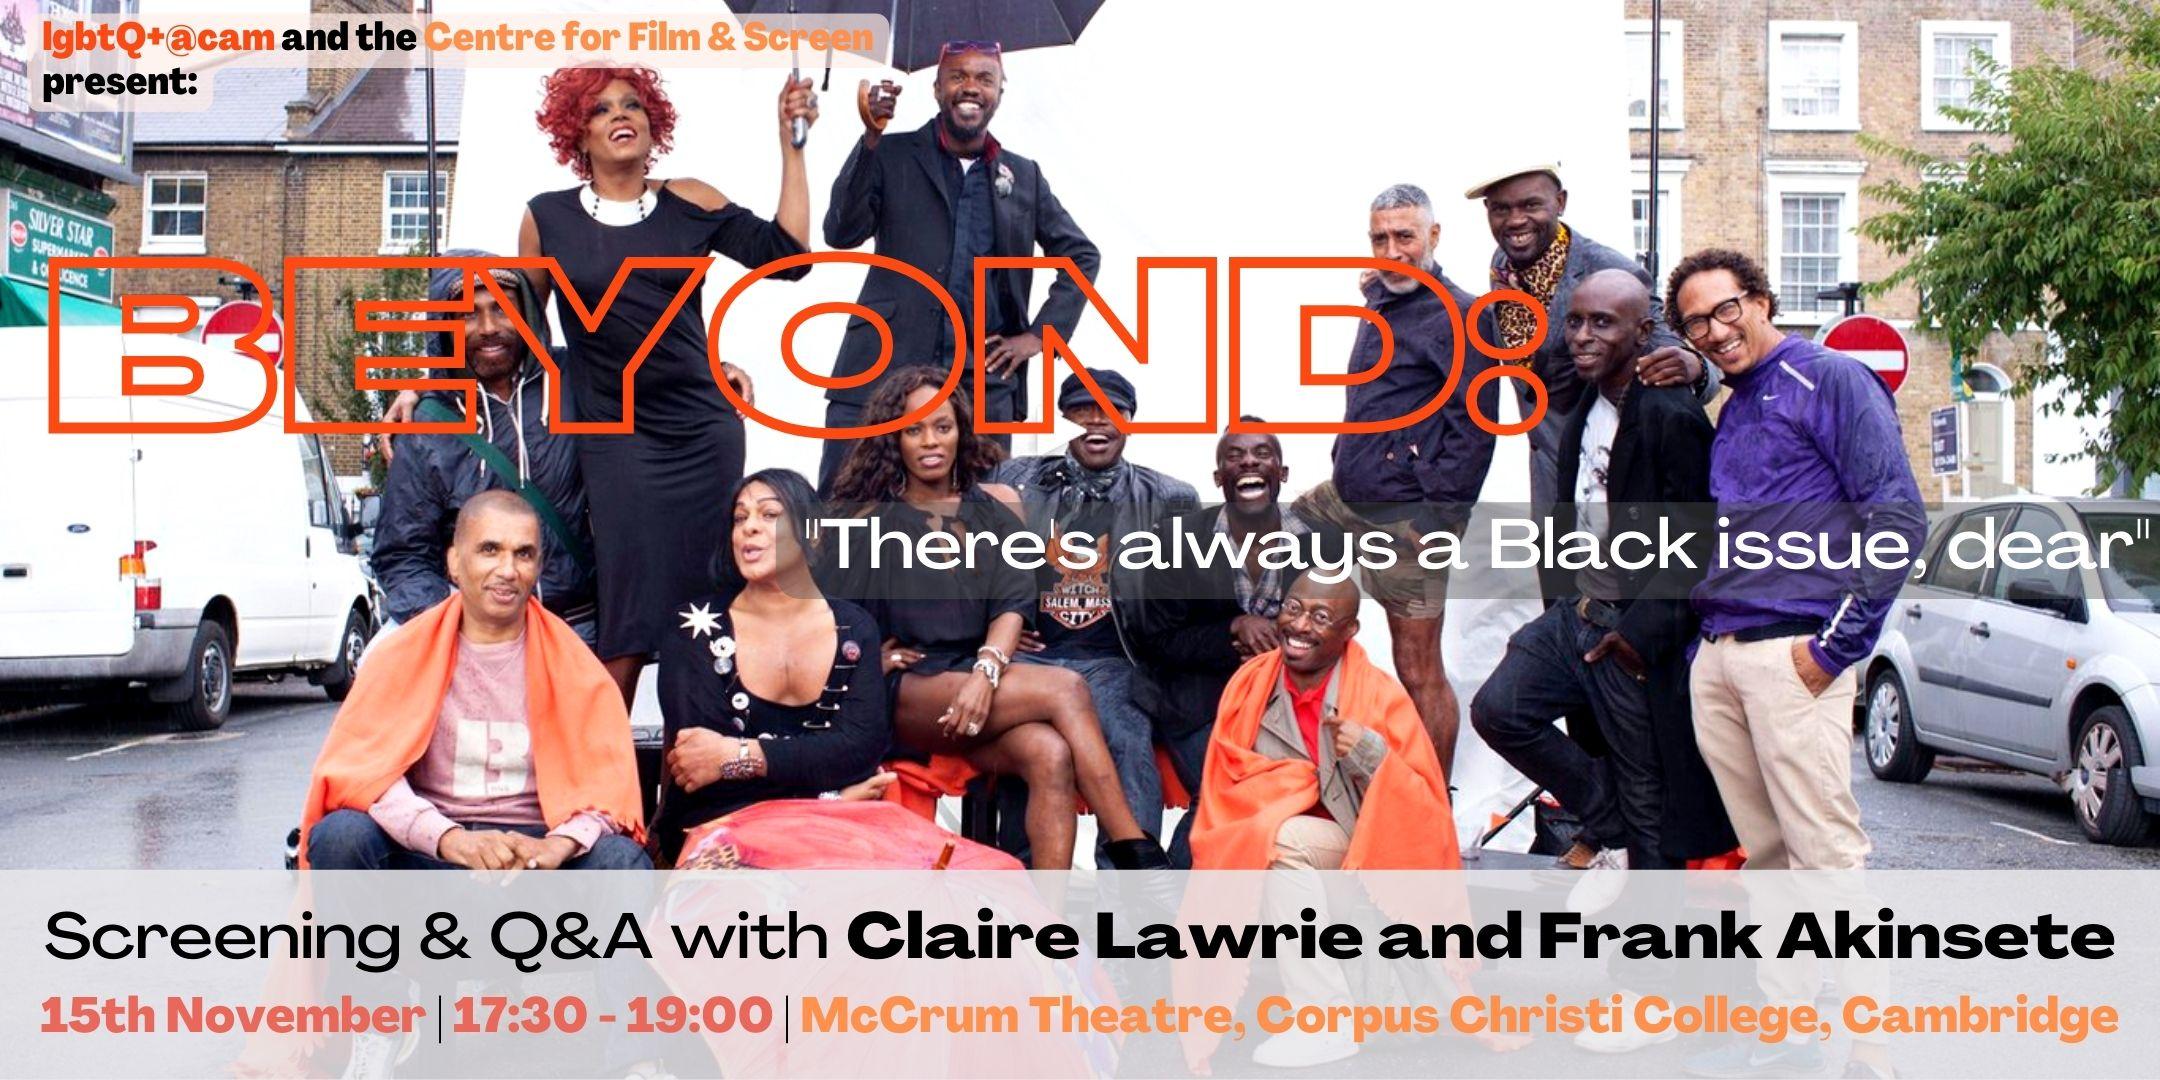 Film screening and director Q&A of "Beyond: there's always a Black issue dear" 